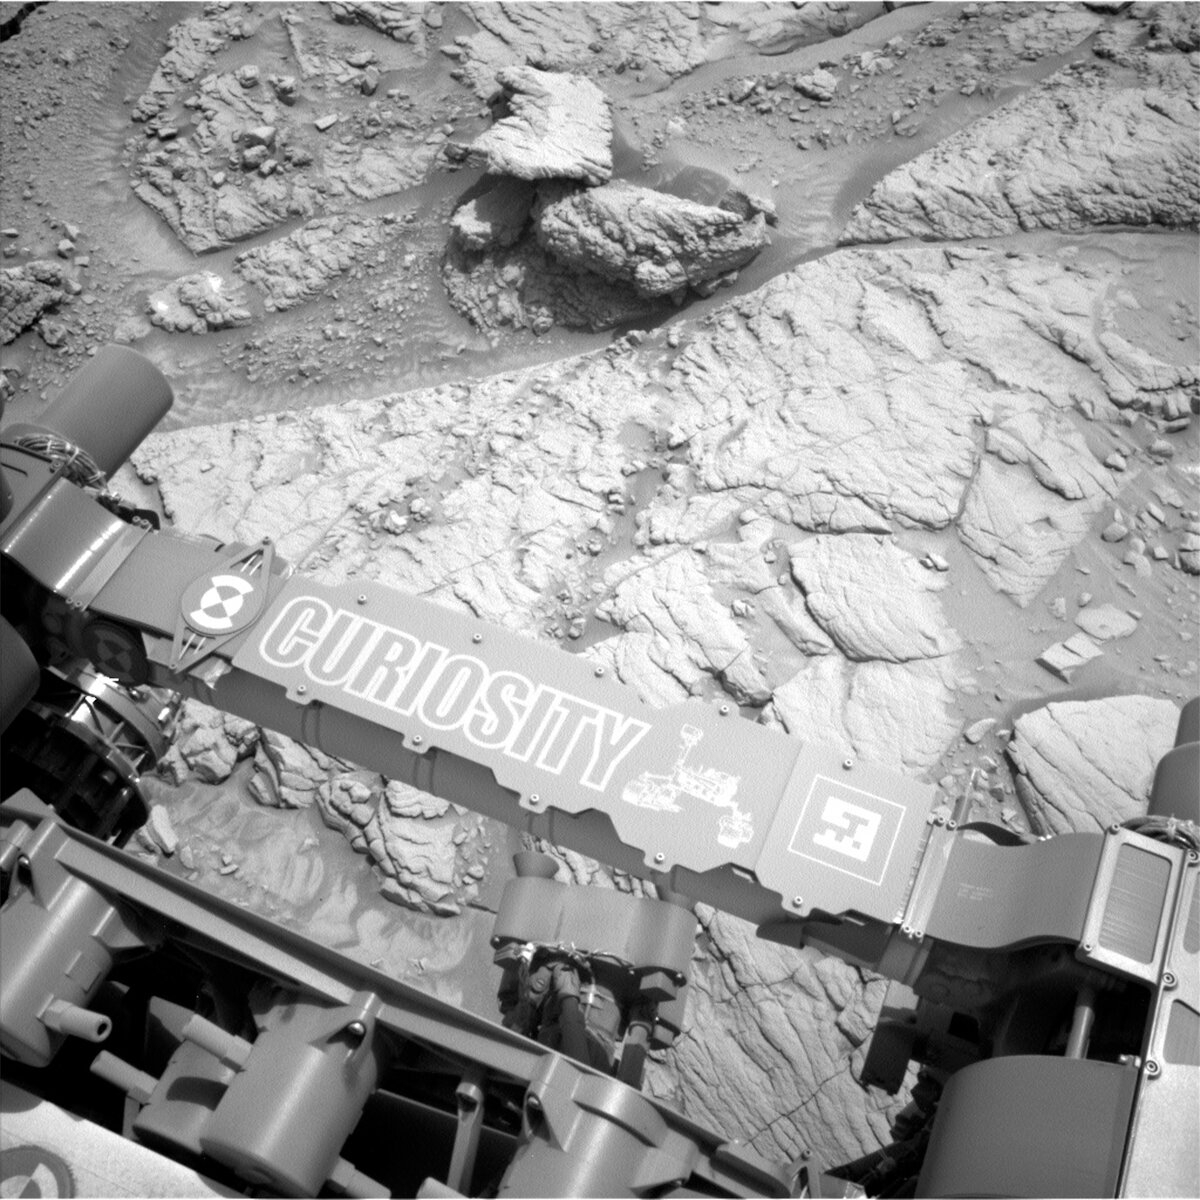 This image shows Curiosity's nameplate above the Mars surface and was taken by Left Navigation Camera onboard Curiosity on Sol 3655.